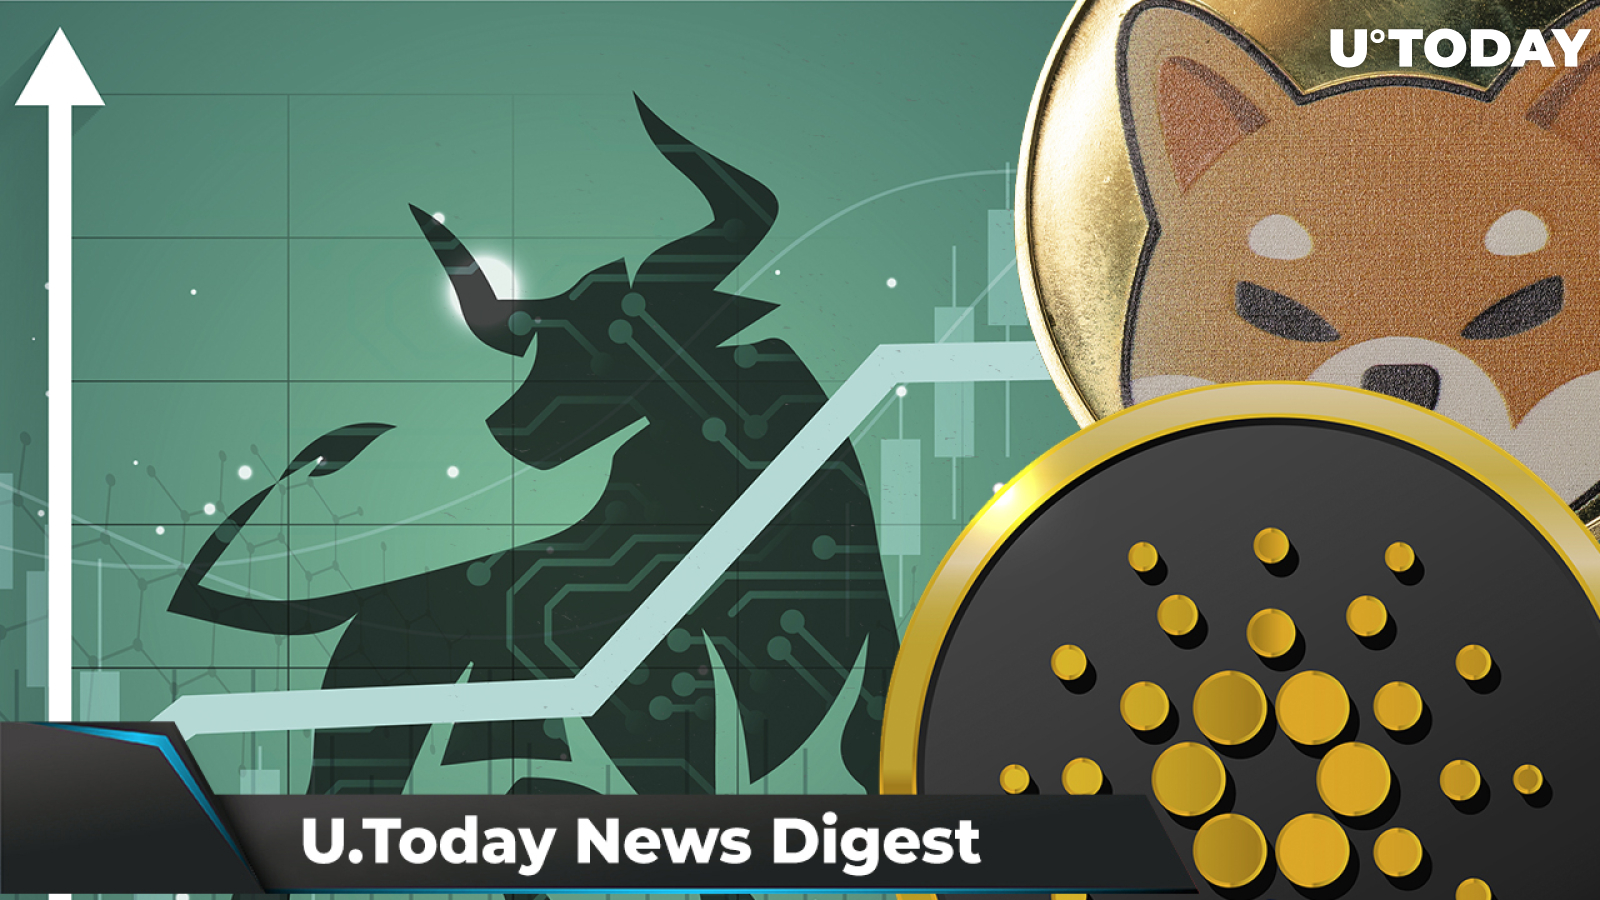 Santiment Sees Two Bullish Signals for BTC, SHIB Community Praised by Republican State Senator, Cardano’s Crucial Update Goes Live: Crypto News Digest by U.Today